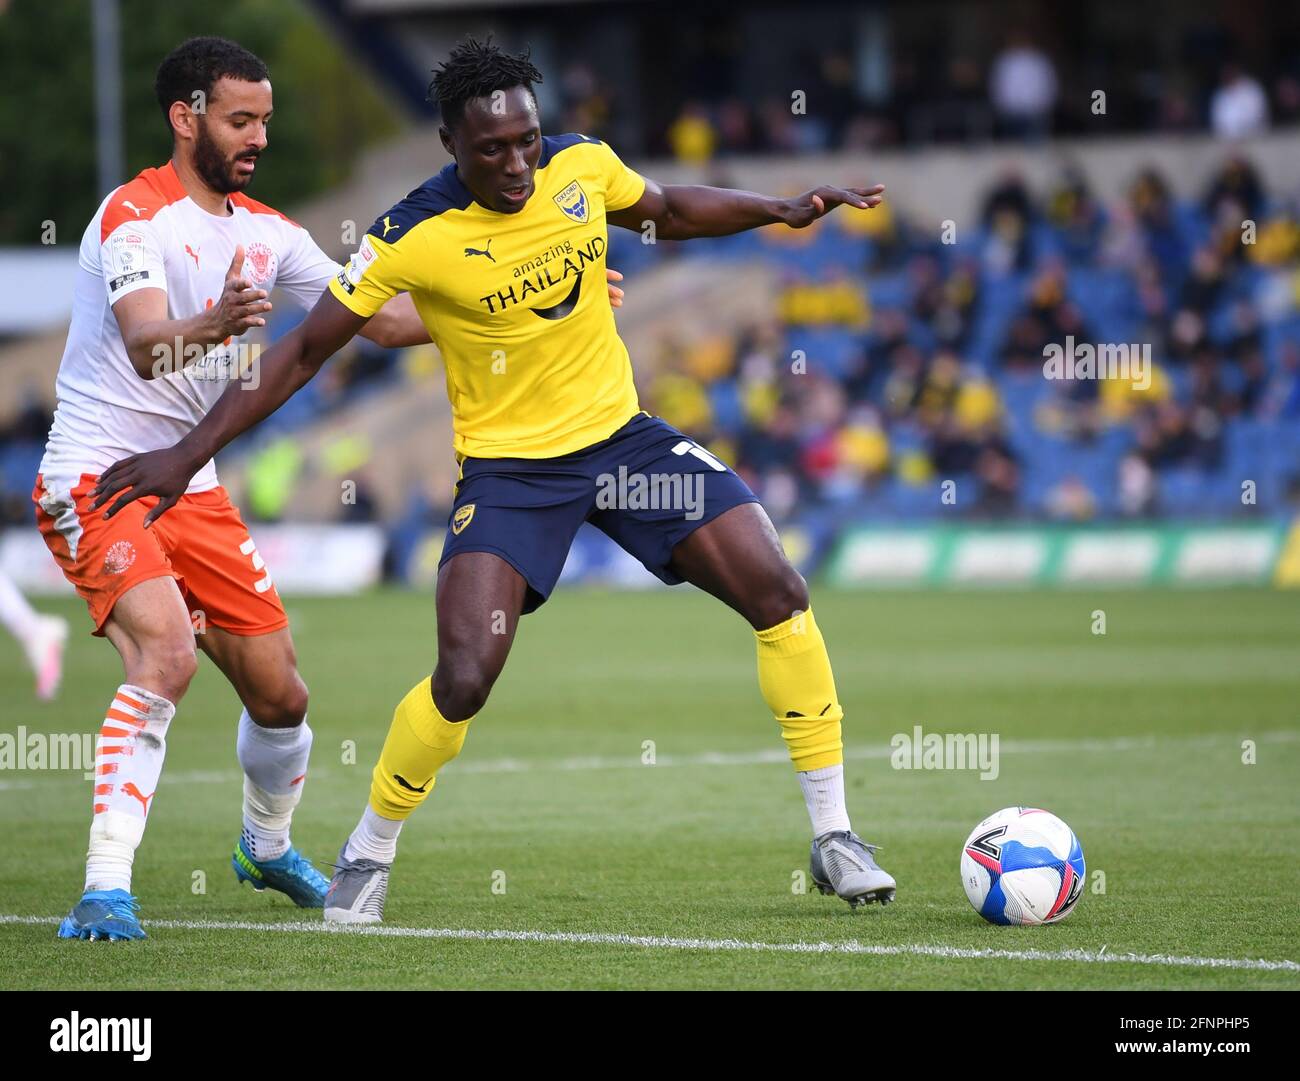 Kassam Stadium, Oxford, Oxfordshire, Royaume-Uni. 18 mai 2021. Football League One, Playoff; Oxford United versus Blackpool; Daniel Agyei d'Oxford United détient Kevin Stewart de Blackpool Credit: Action plus Sports/Alay Live News Banque D'Images